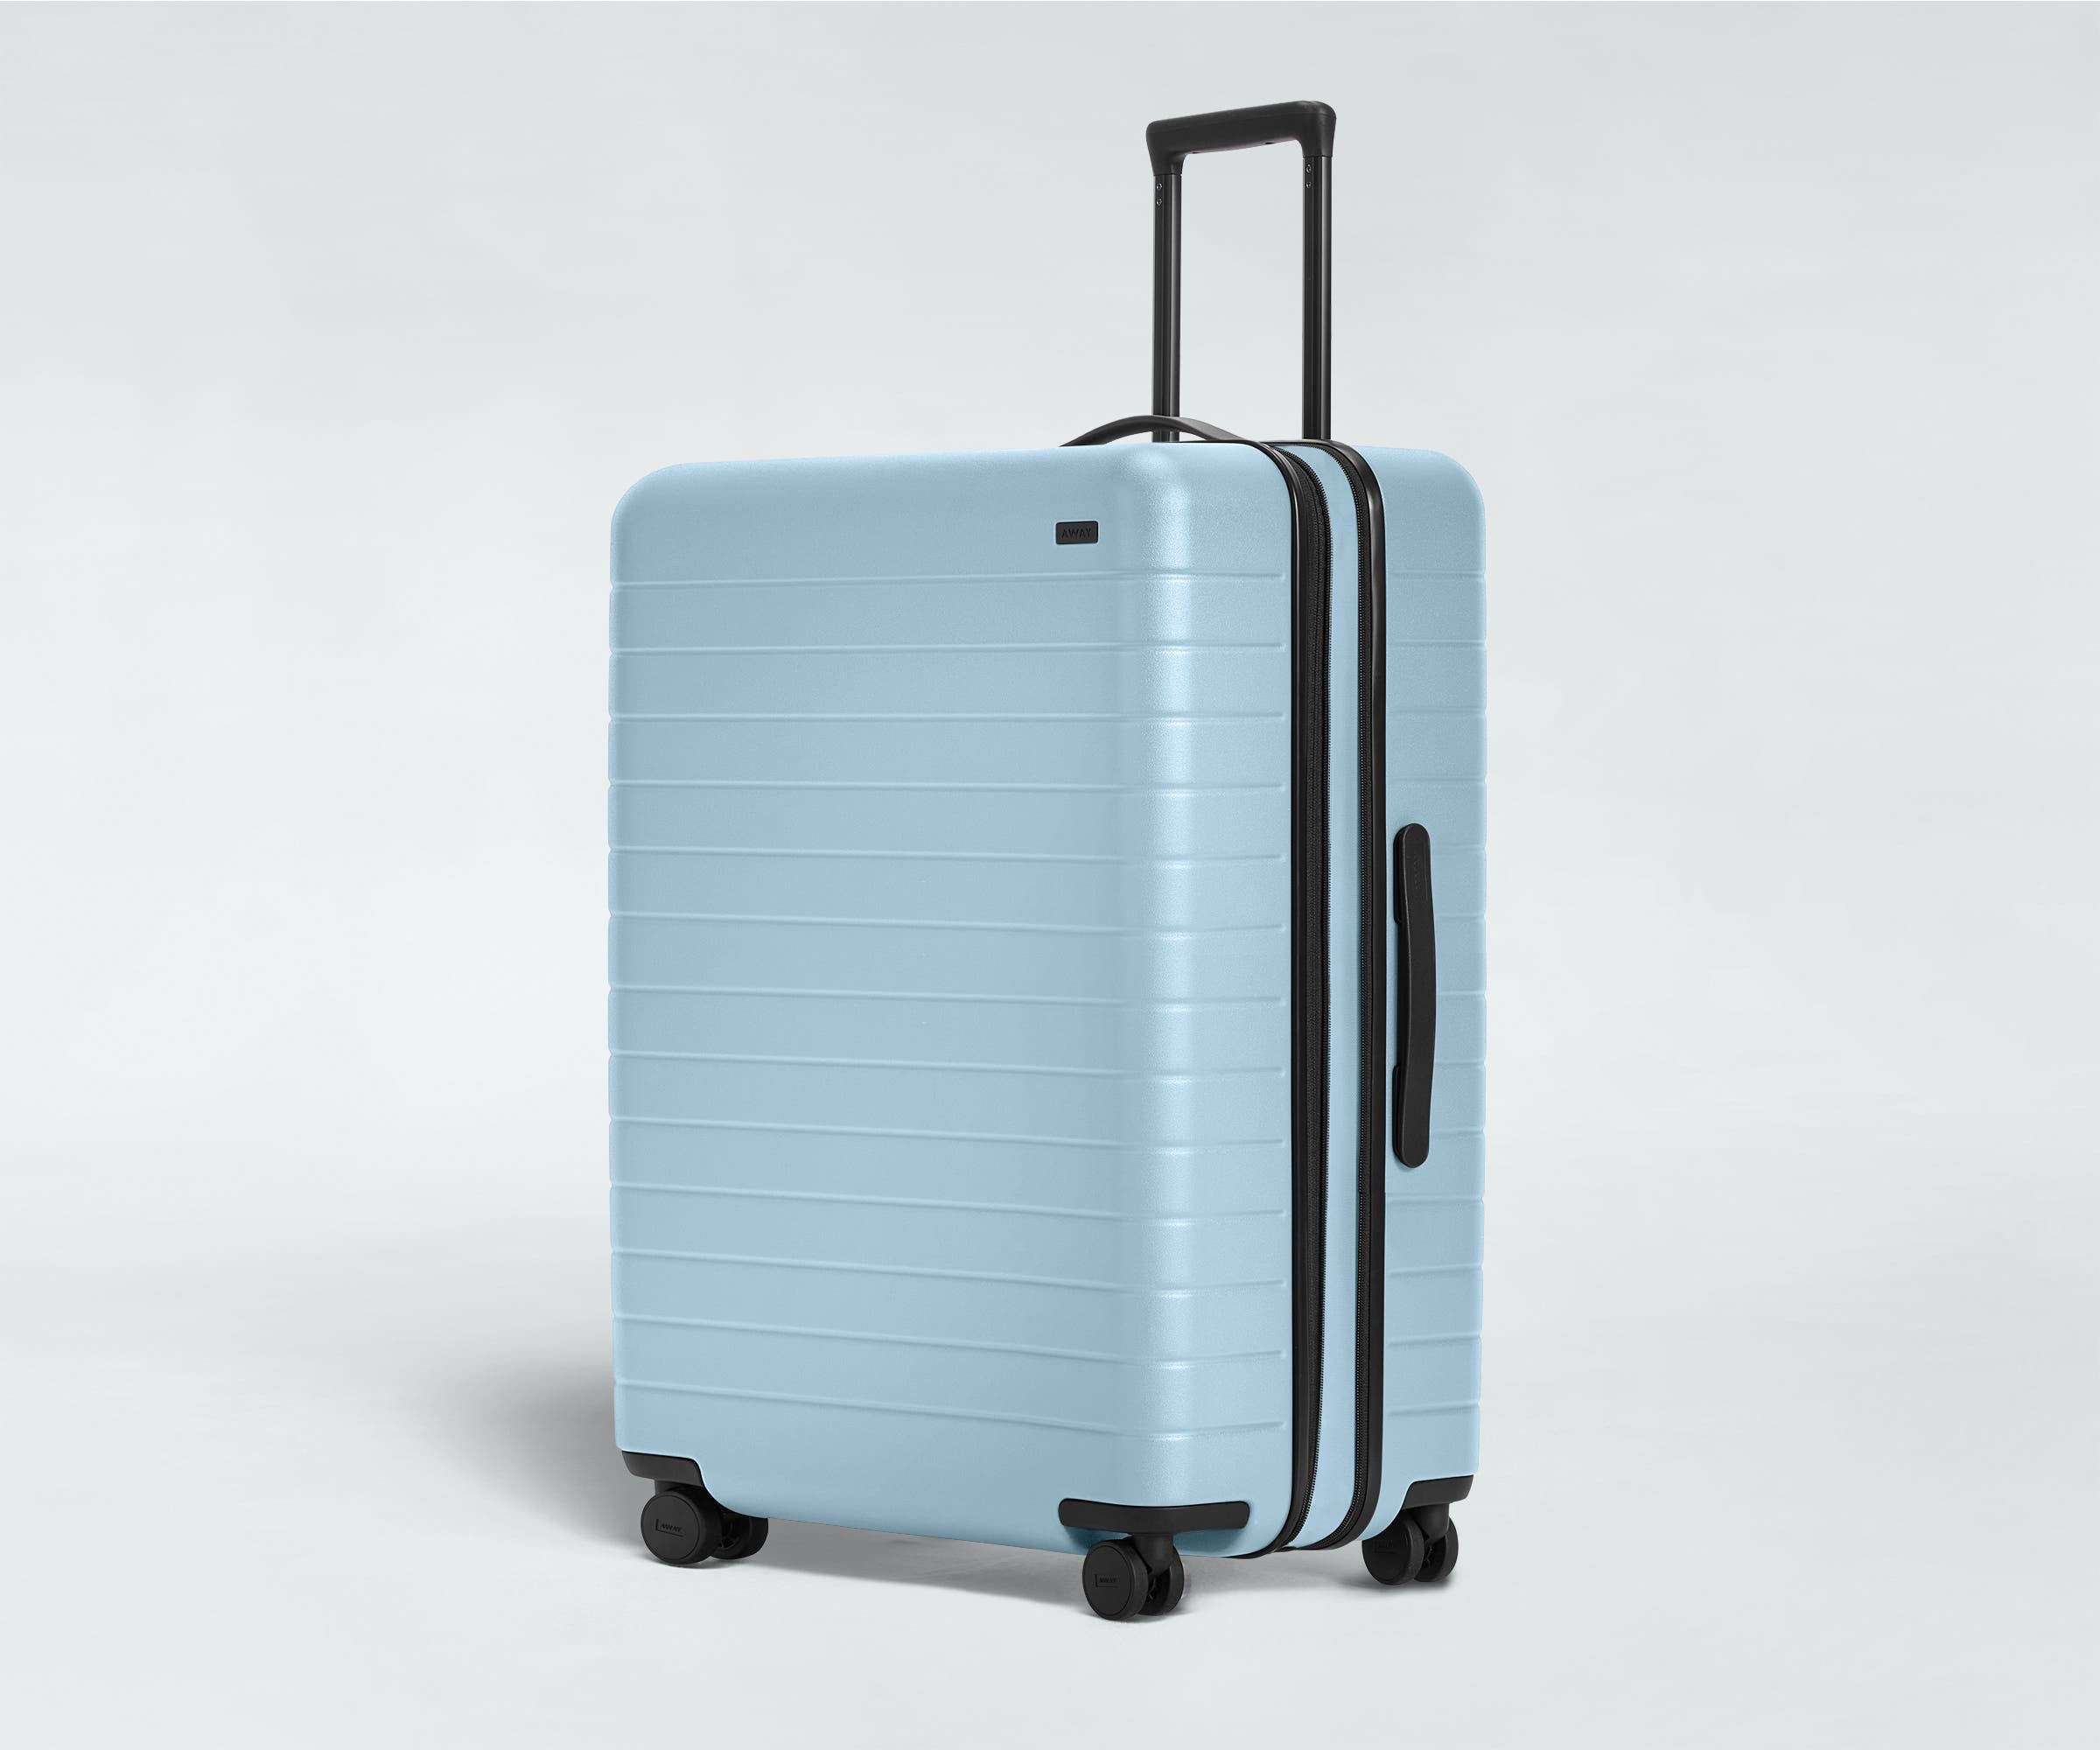 Never lose sight of your luggage with Away's new limited-edition colors